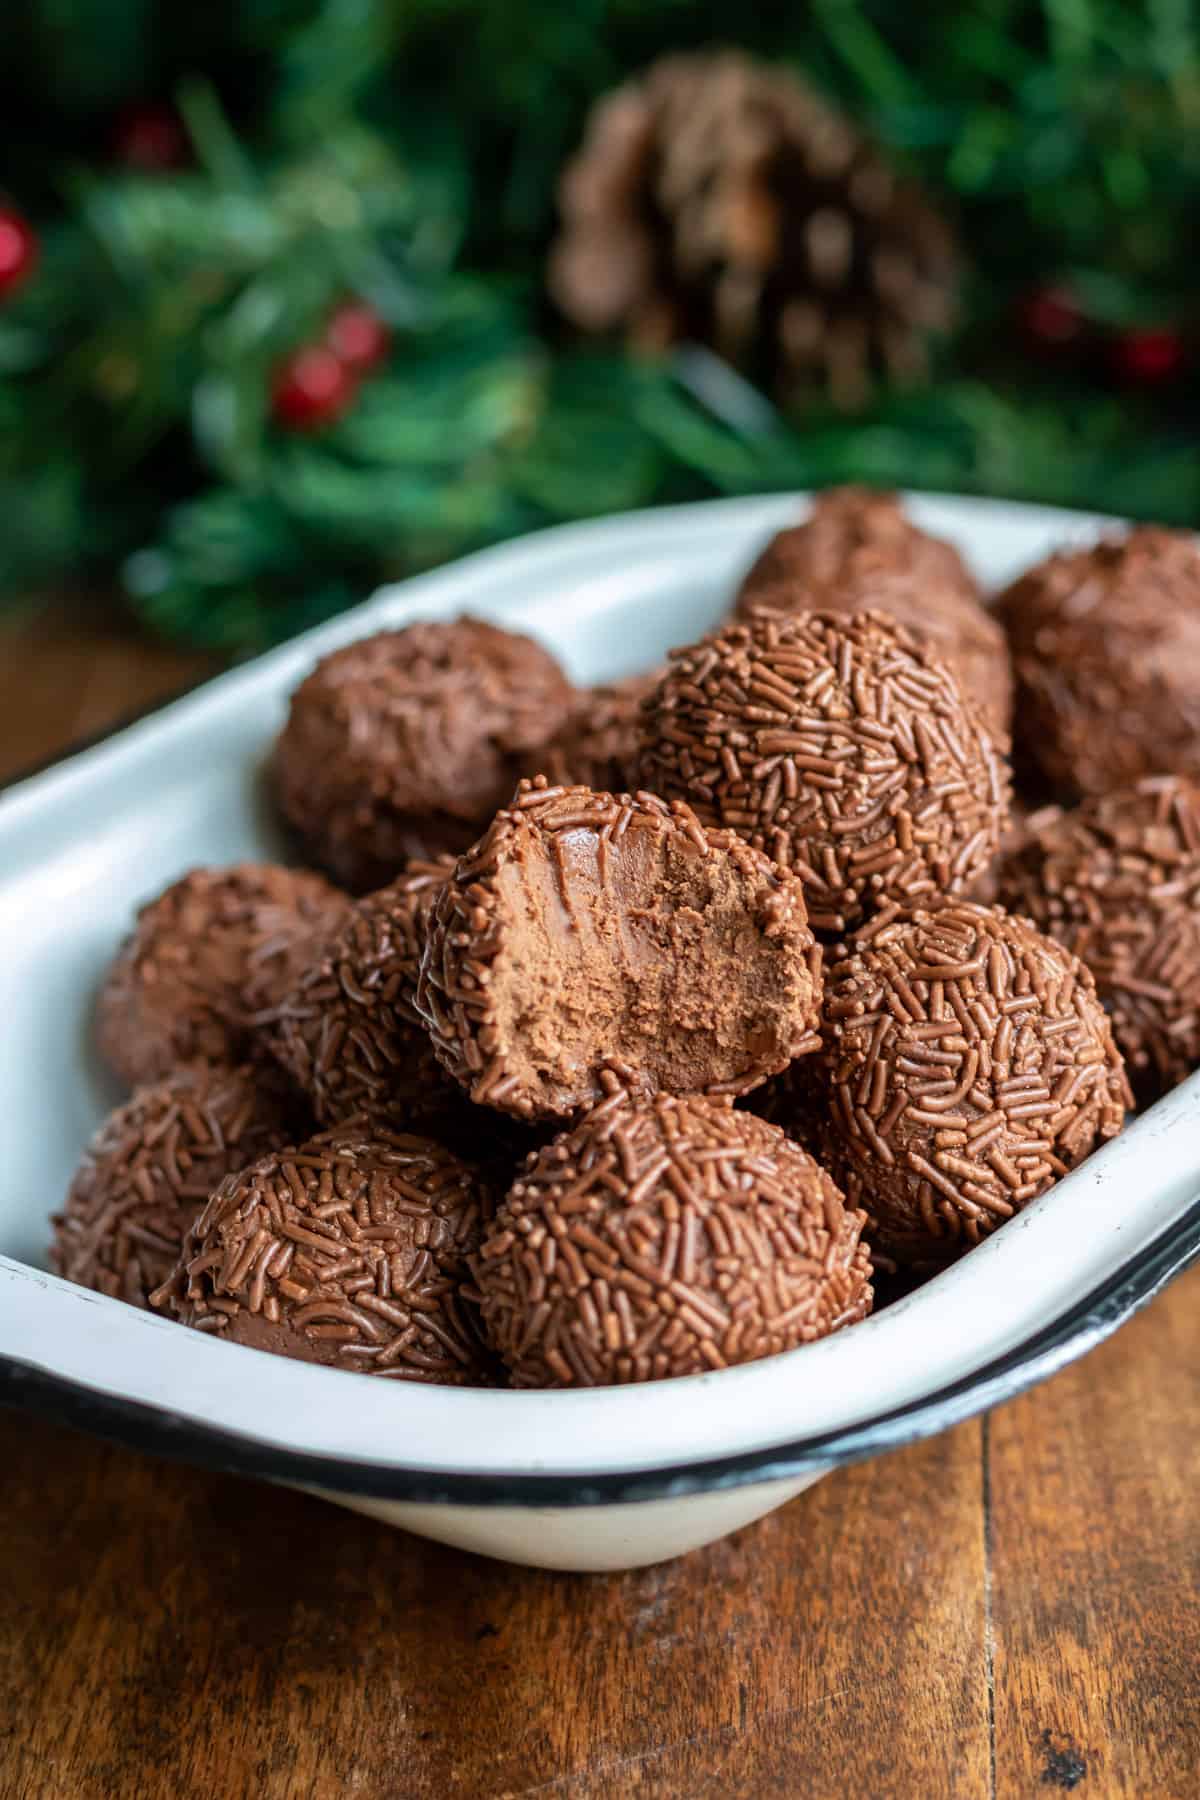 Rum ball with a bite out, in a dish of other rumkugeln.